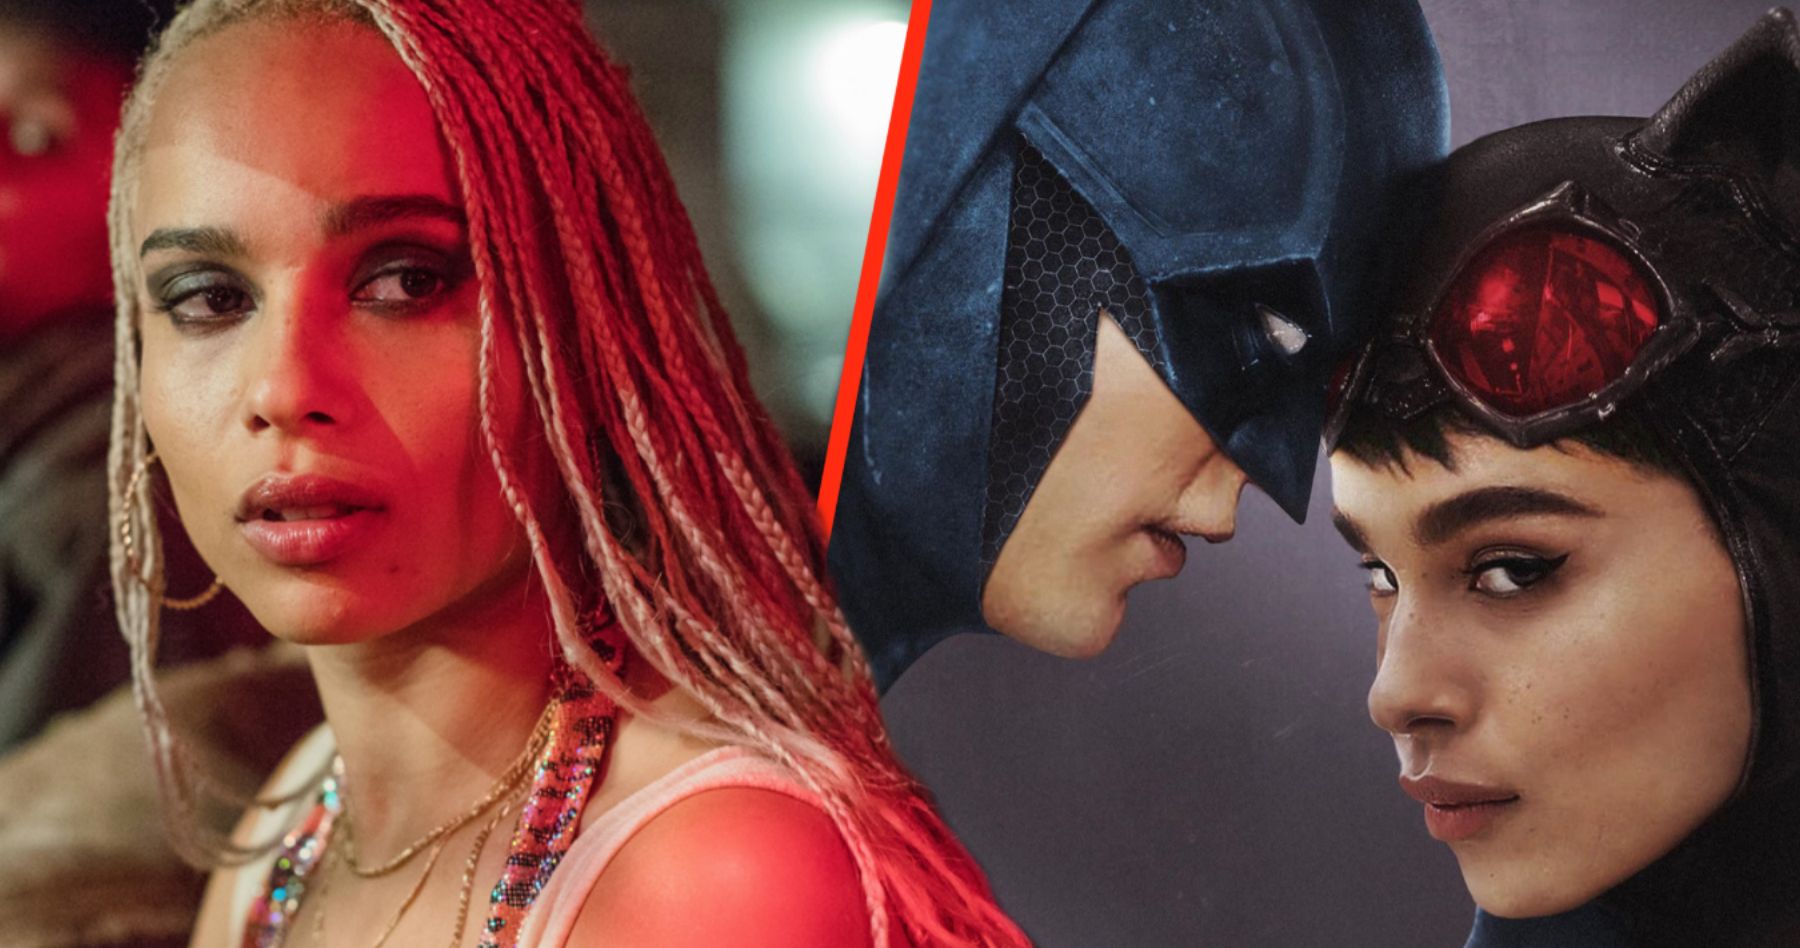 Zo&#235 Kravitz Teases Catwoman Suit and DC Comic Book Inspiration for The Batman